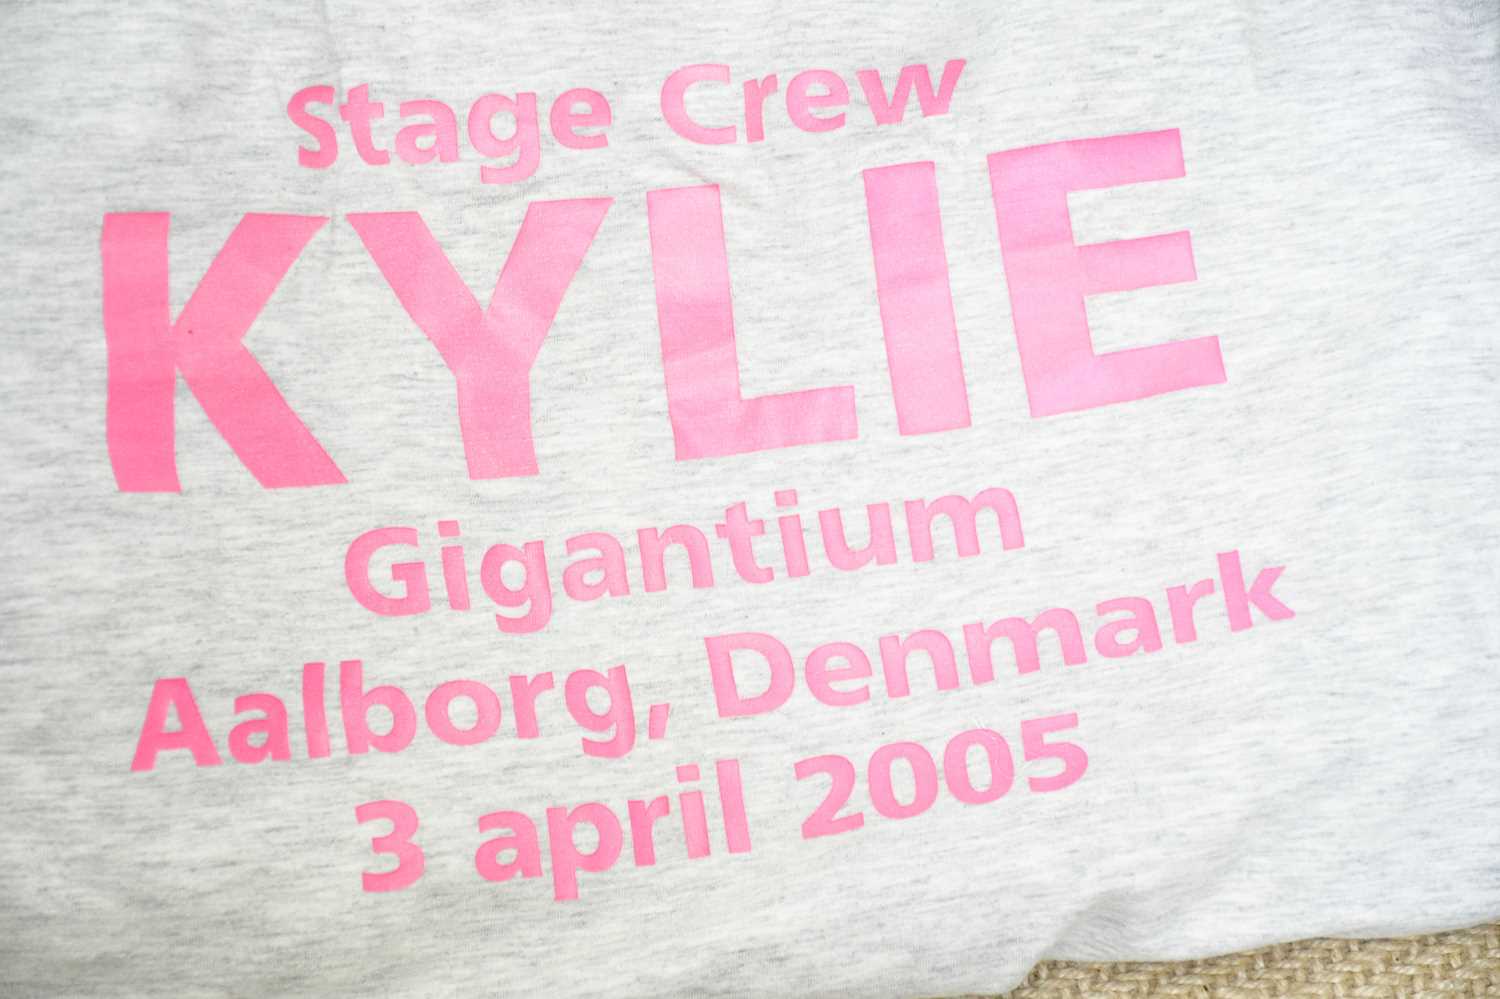 KYLIE MINOGUE; a Showgirl Homecoming Tour crew T-shirt, a stage crew Kylie Gigantium Aalborg, - Image 2 of 12